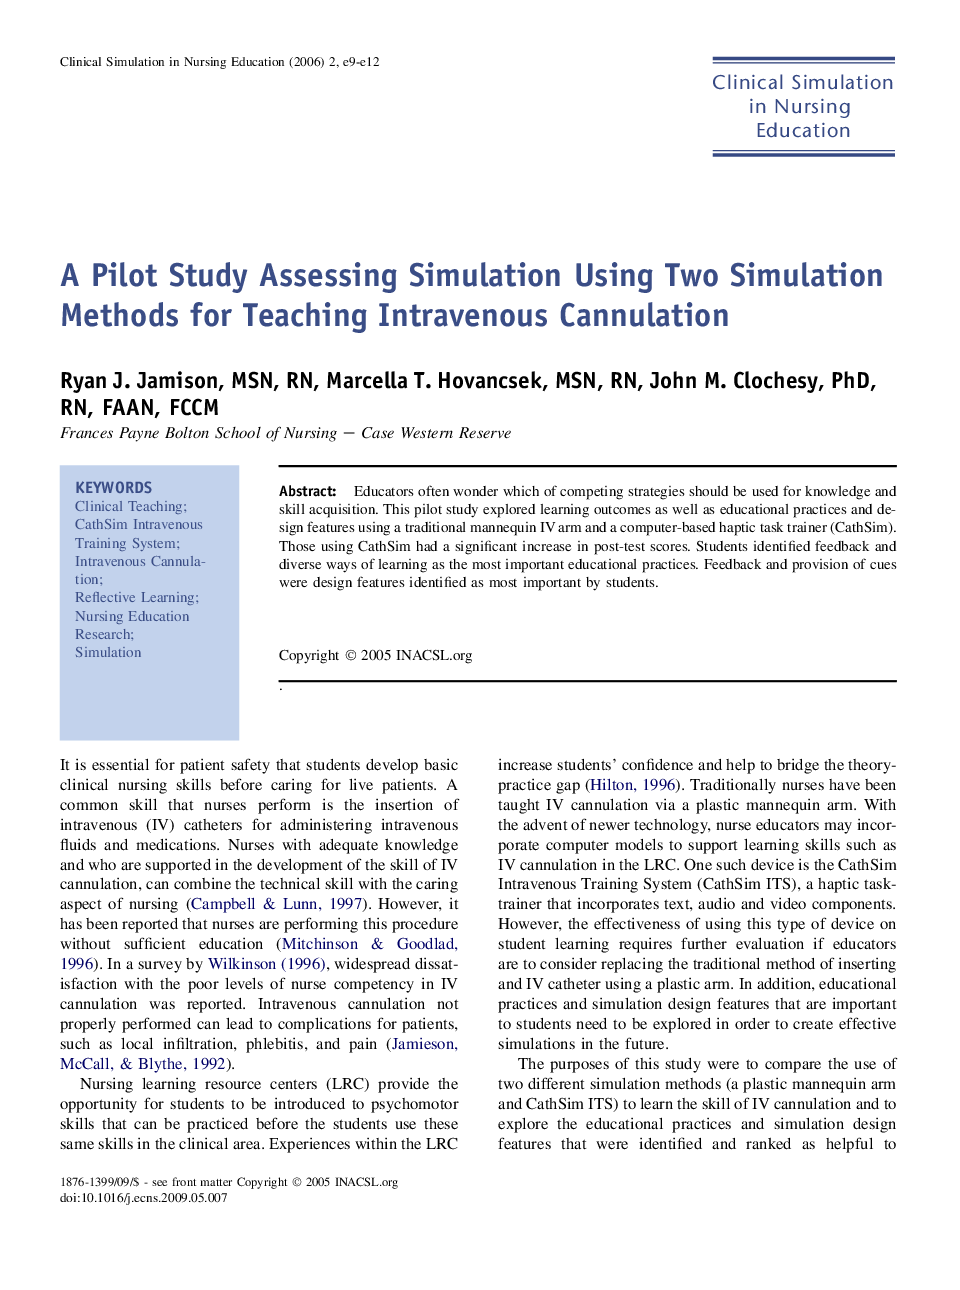 A Pilot Study Assessing Simulation Using Two Simulation Methods for Teaching Intravenous Cannulation